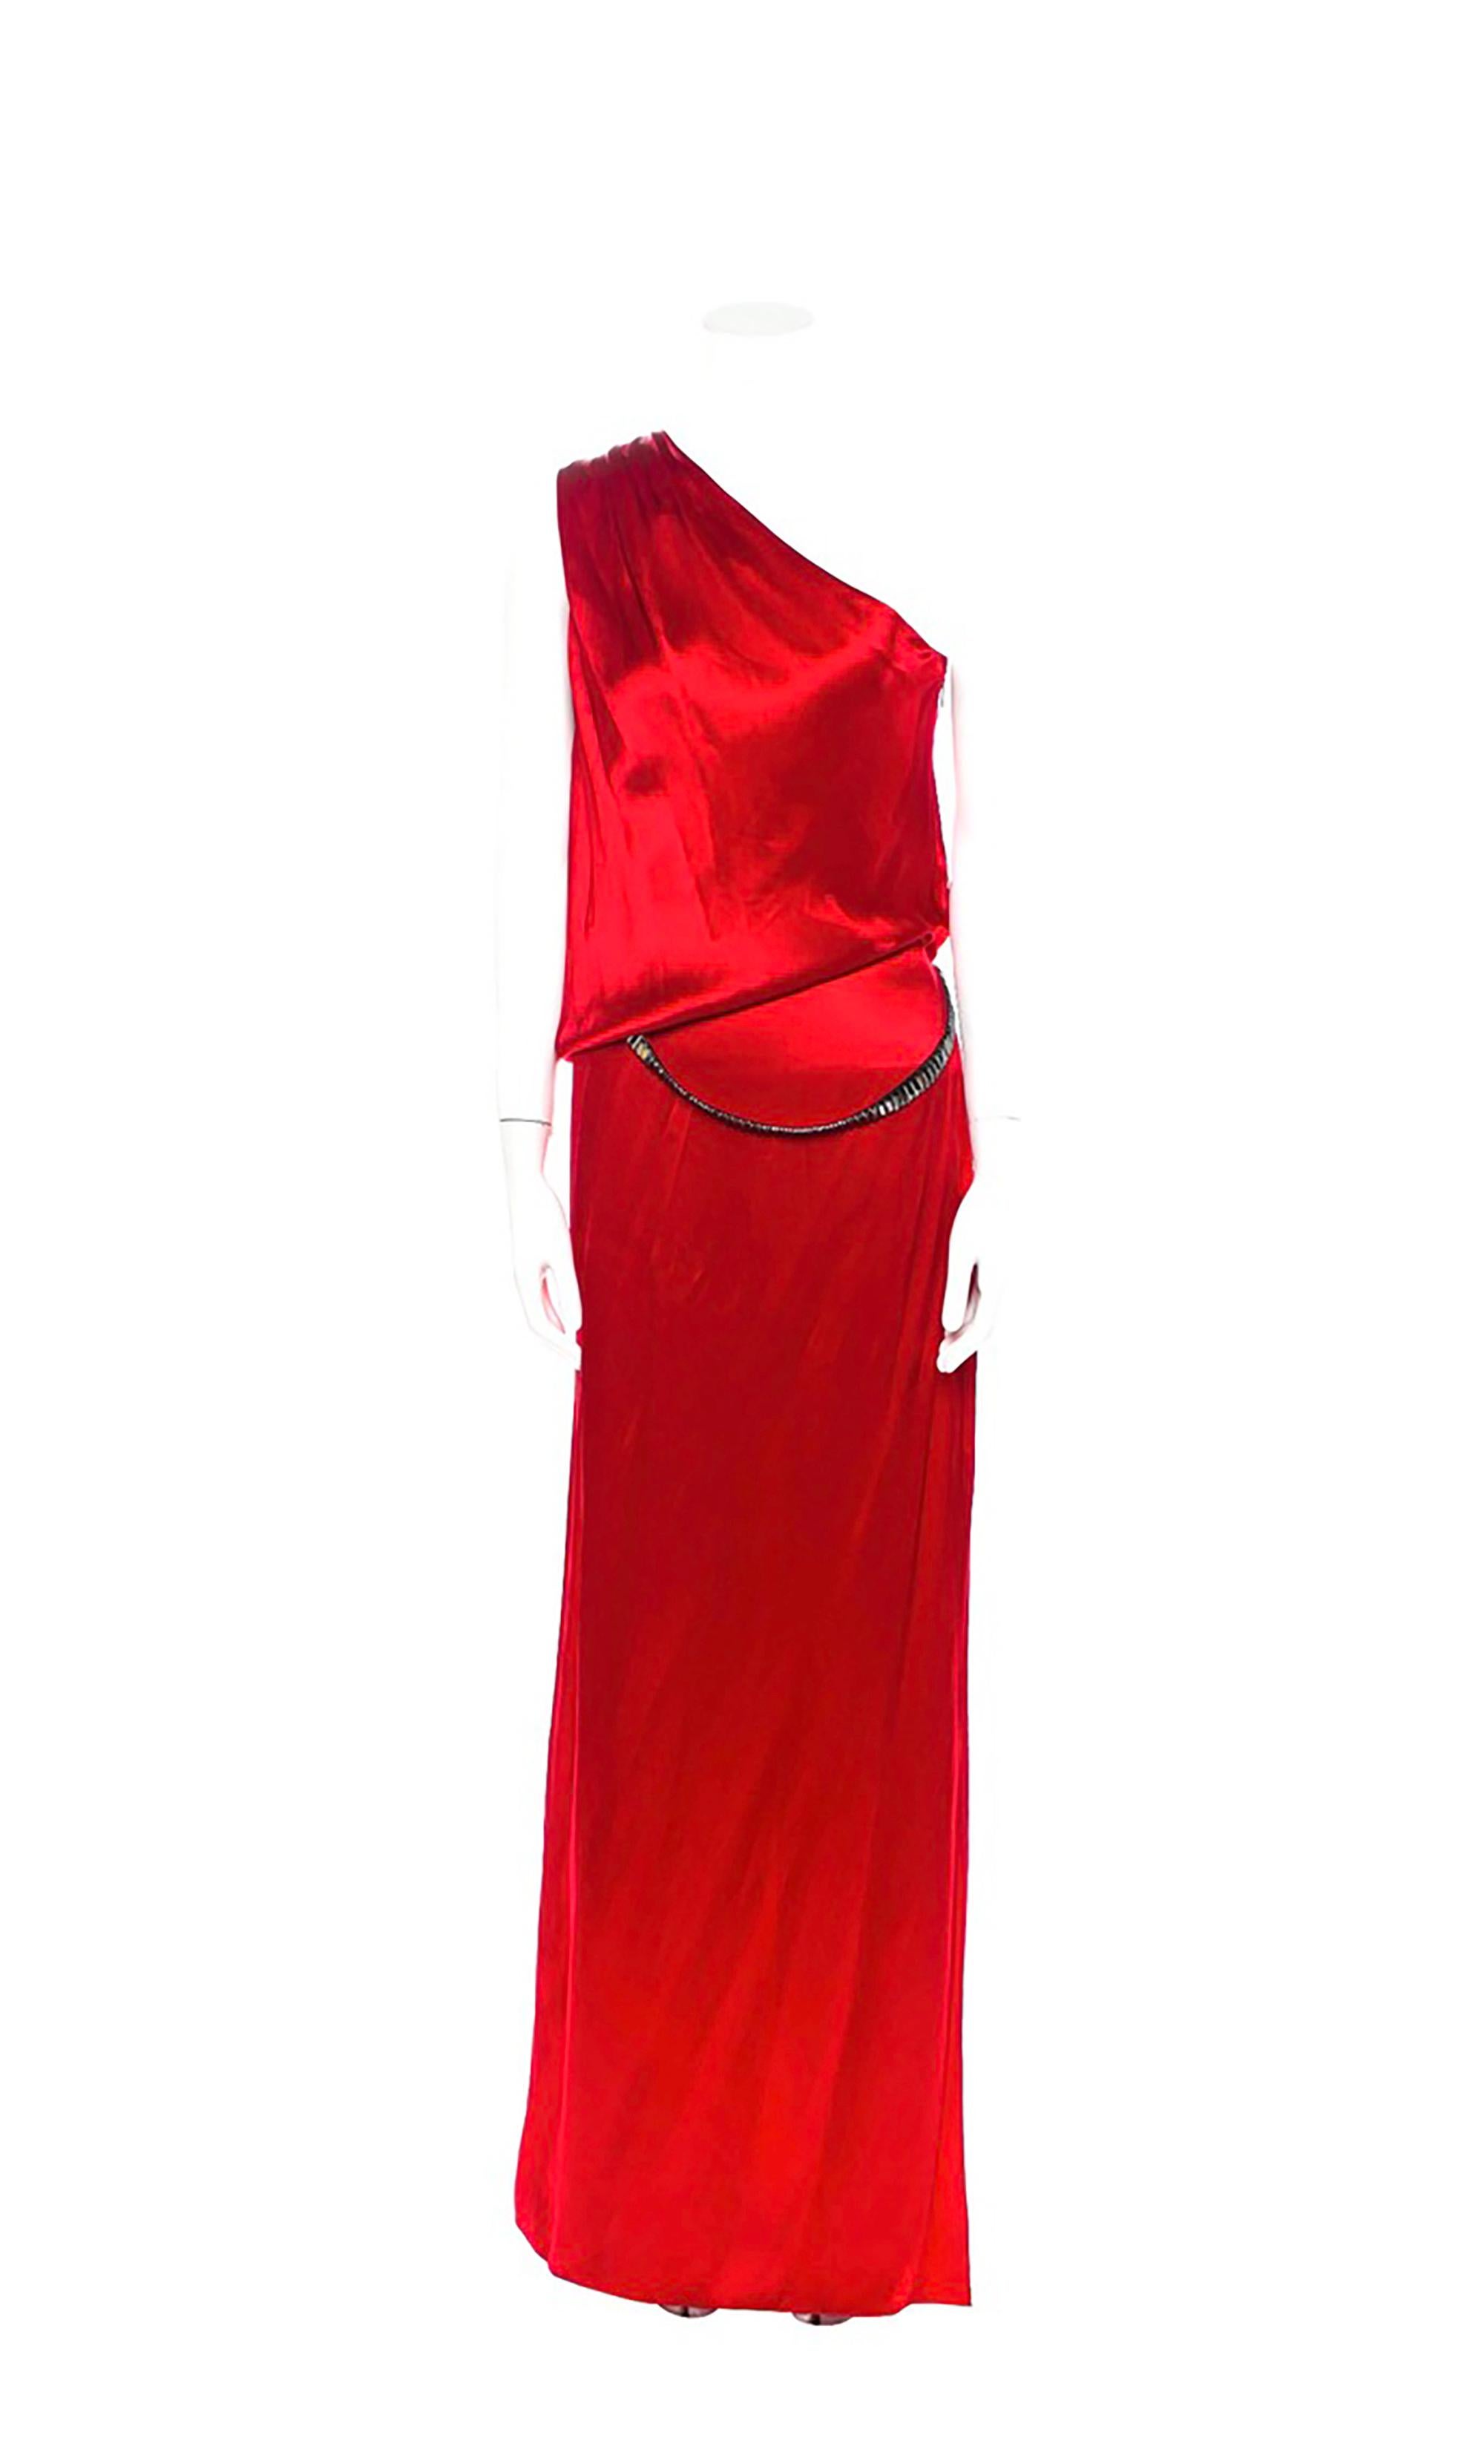 Roberto Cavalli Red One Shoulder Evening Gown In Excellent Condition For Sale In Austin, TX